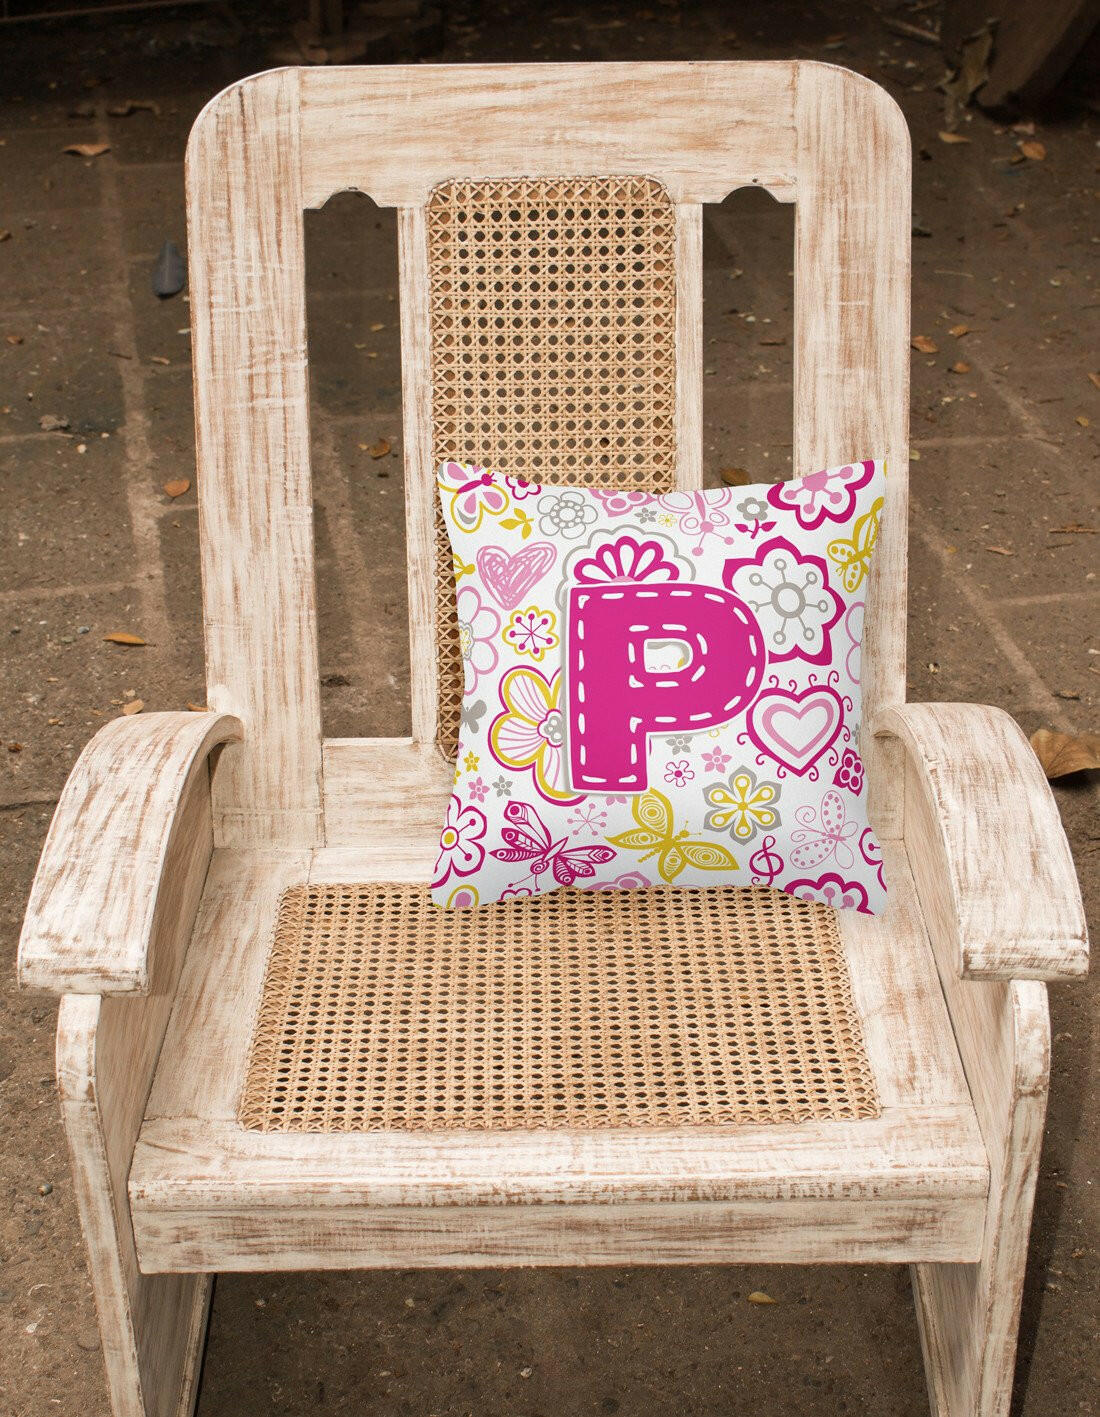 Letter P Flowers and Butterflies Pink Canvas Fabric Decorative Pillow CJ2005-PPW1414 by Caroline's Treasures